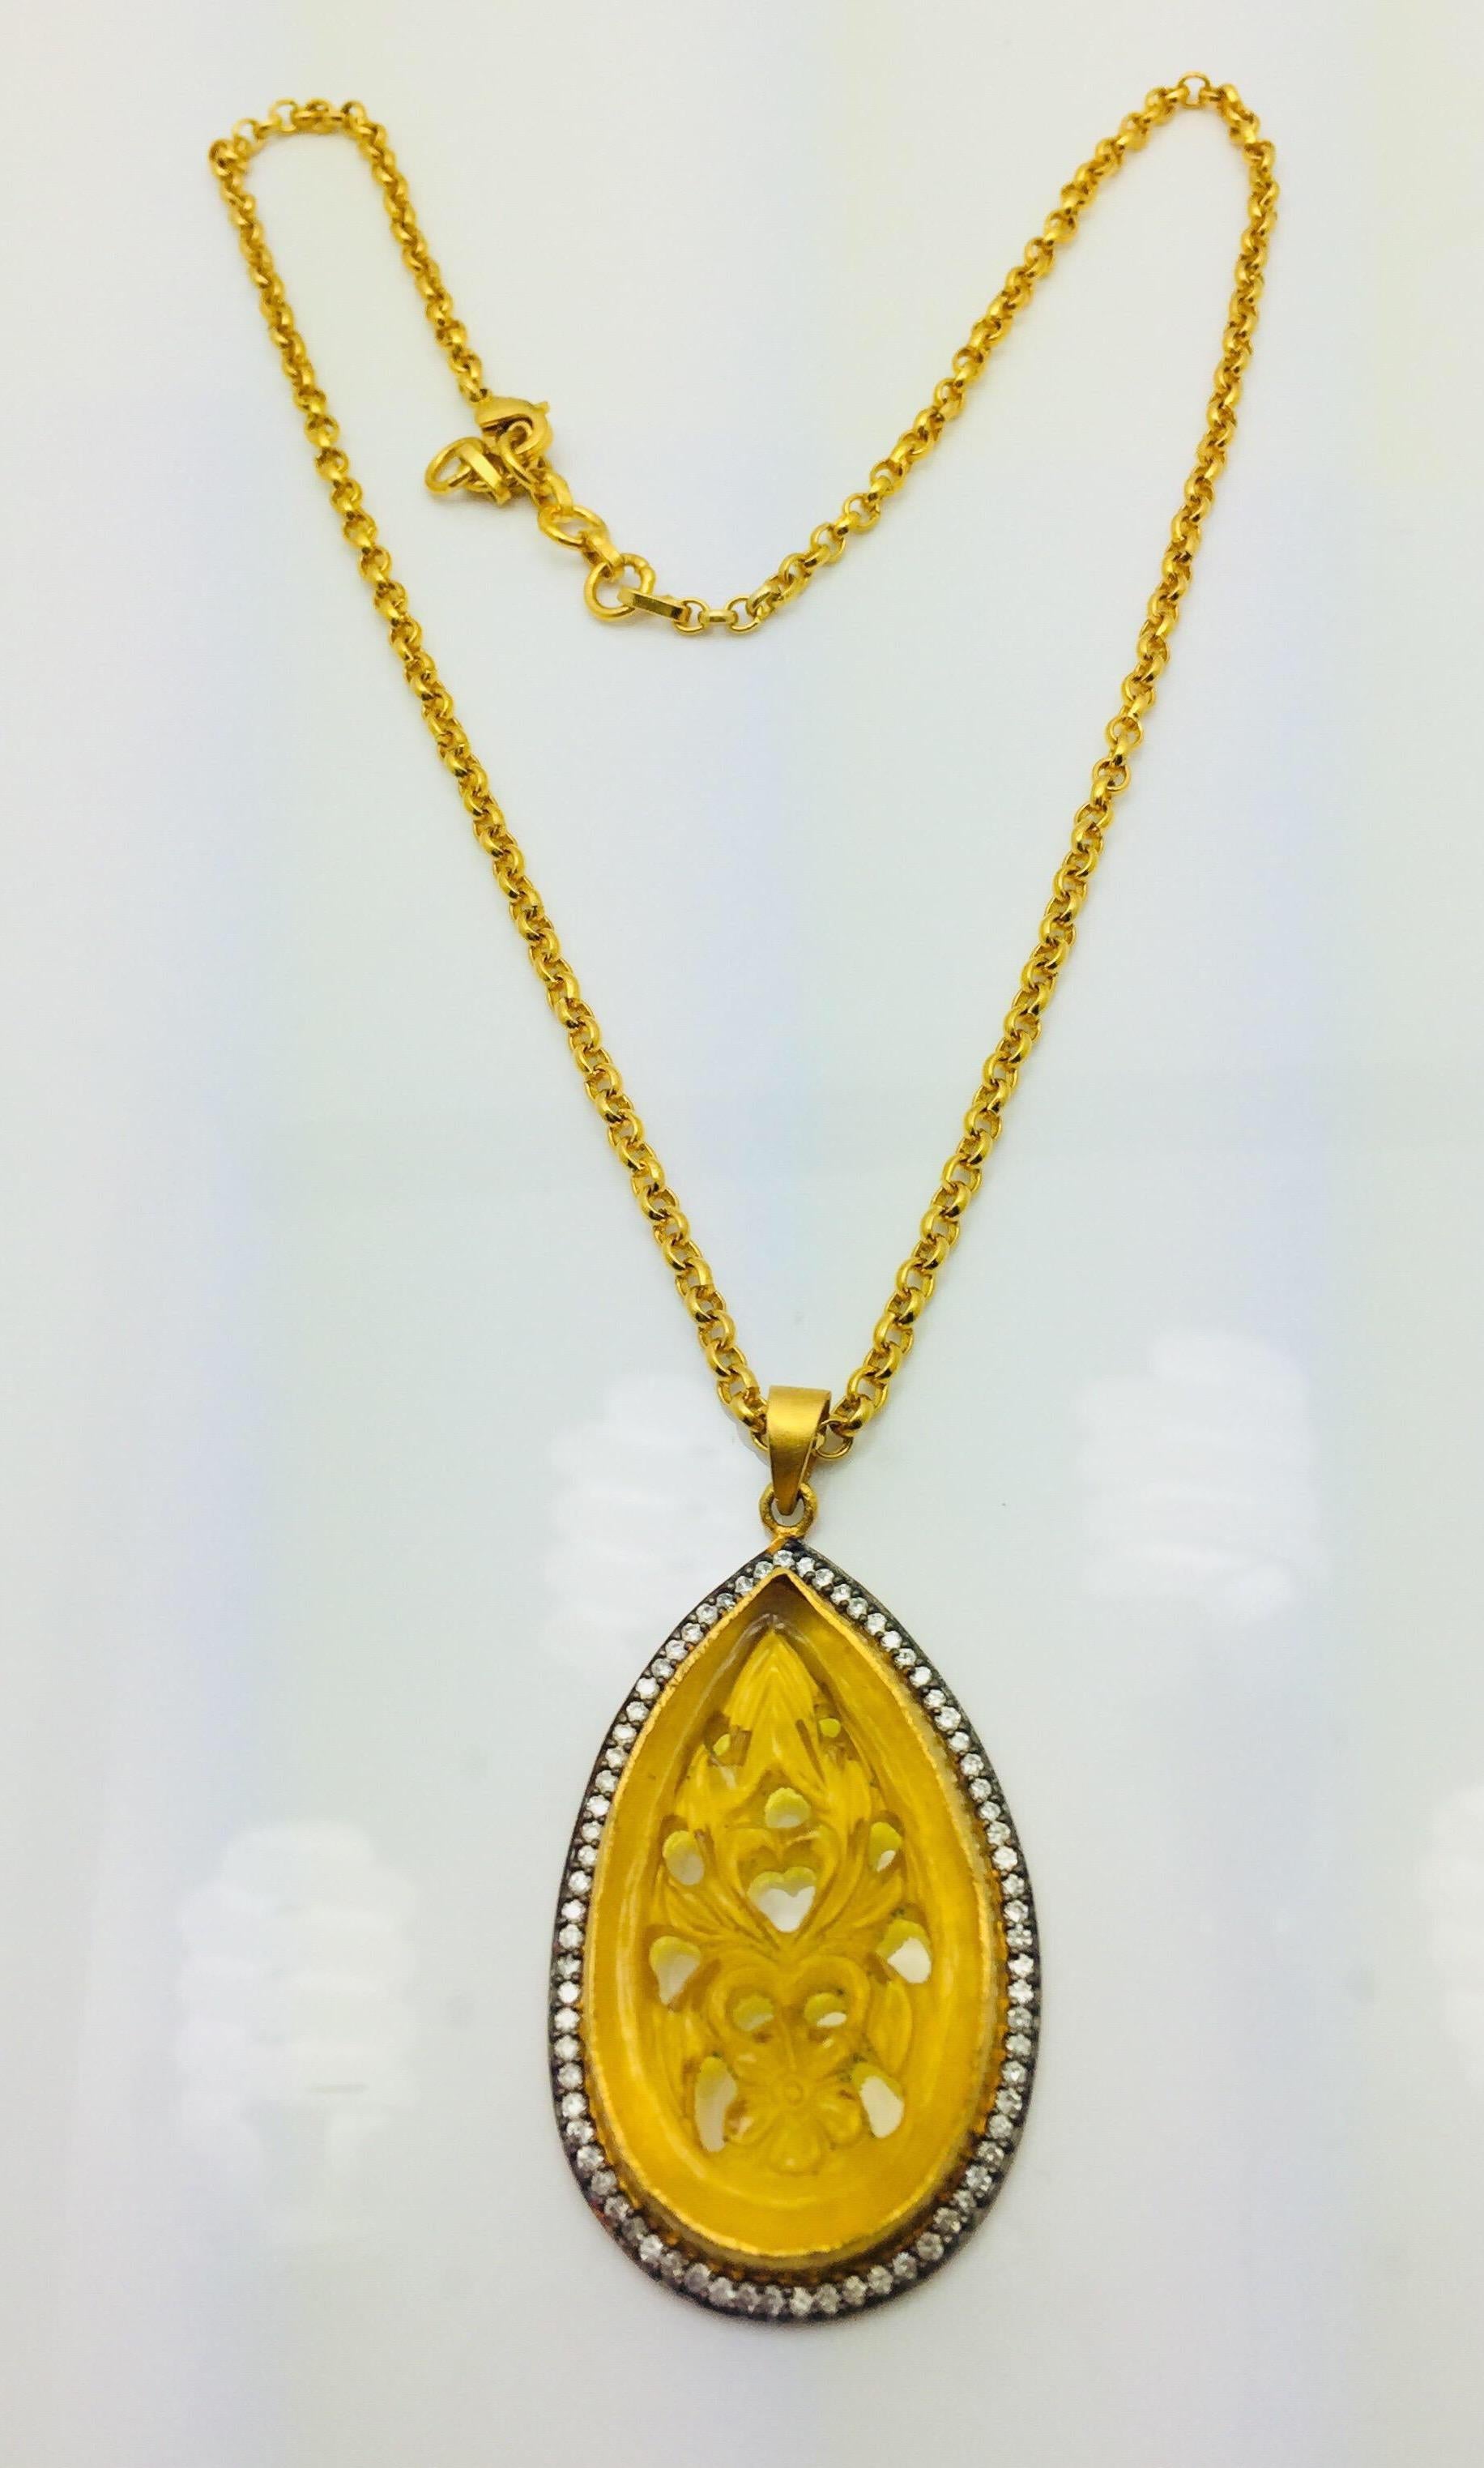 Make a statement with this hand carved resin golden amber necklace. Artfully crafted, these gorgeous carved necklace is enhanced with cubic zircon.  Chain length 18 inches.  More color options available as well.

FOLLOW  MEGHNA JEWELS storefront to